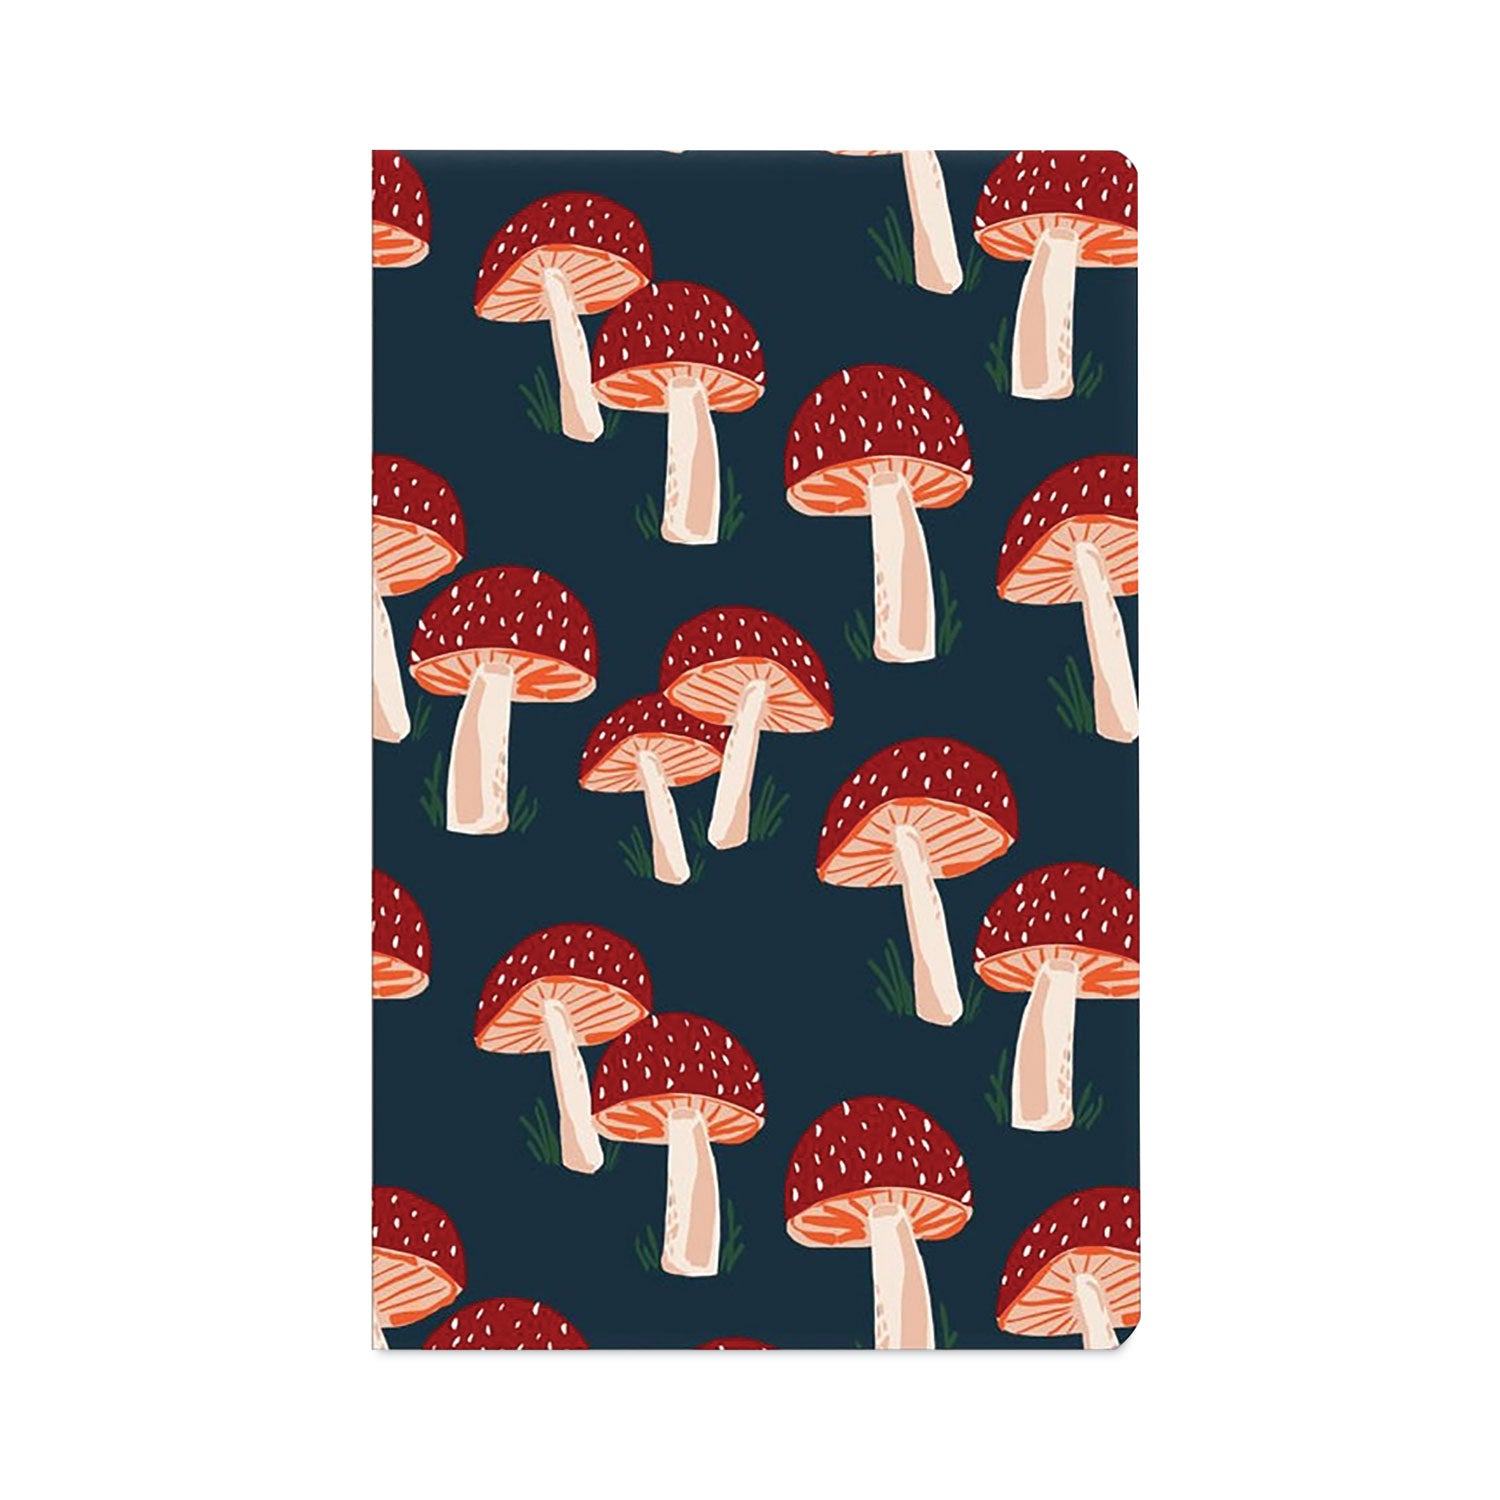 classic-layflat-softcover-notebook-mushroom-artwork-medium-college-rule-navy-blue-multicolor-cover-72-8-x-5-sheets_dnklfc1138l - 1